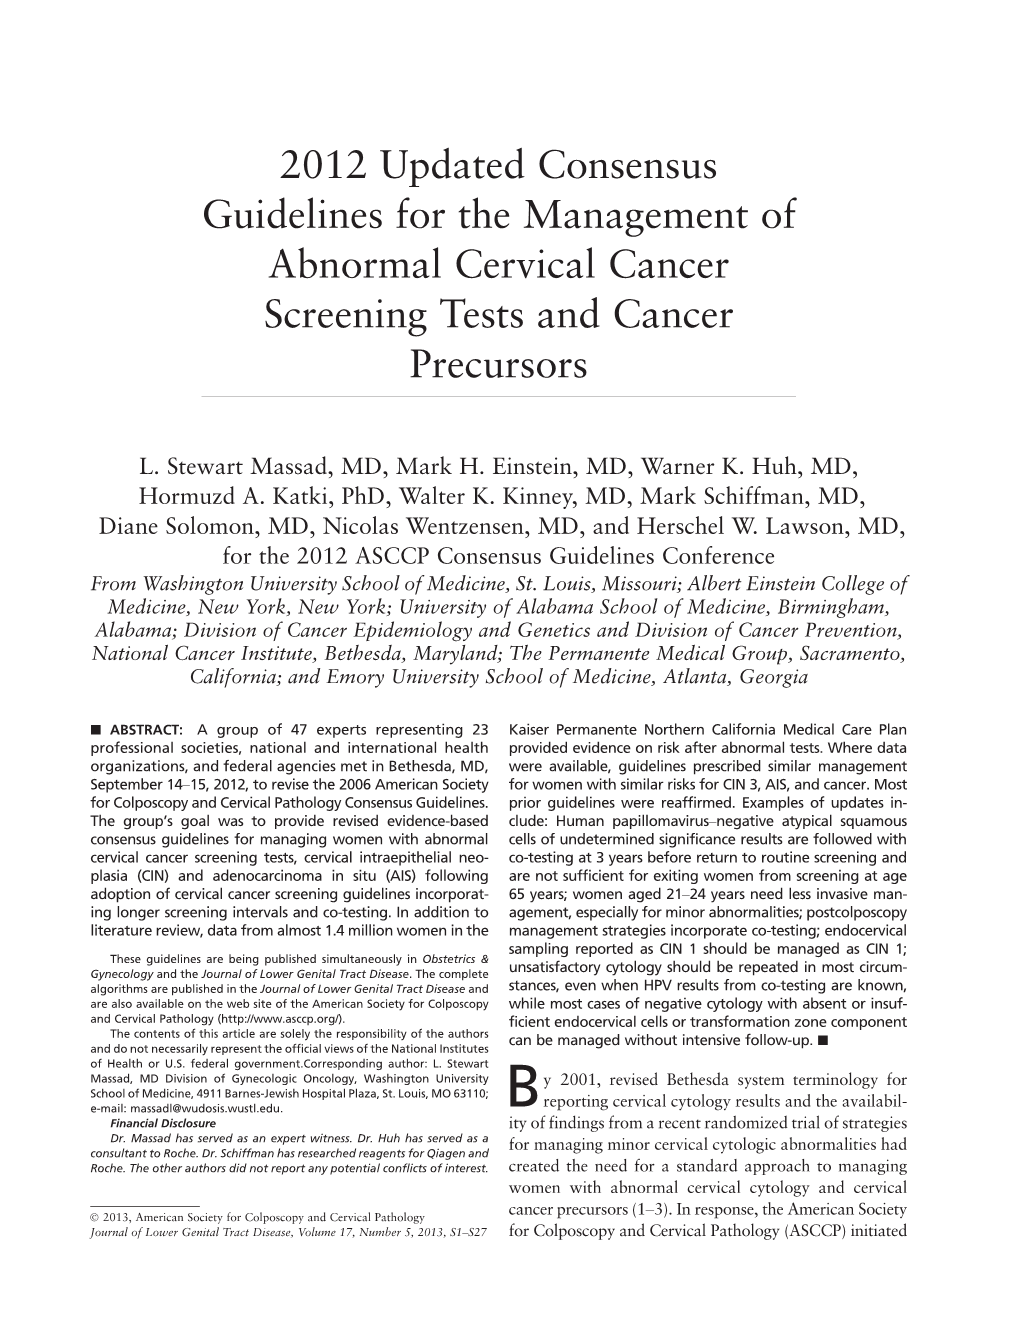 2012 Updated Consensus Guidelines for Managing Abnormal Cervical